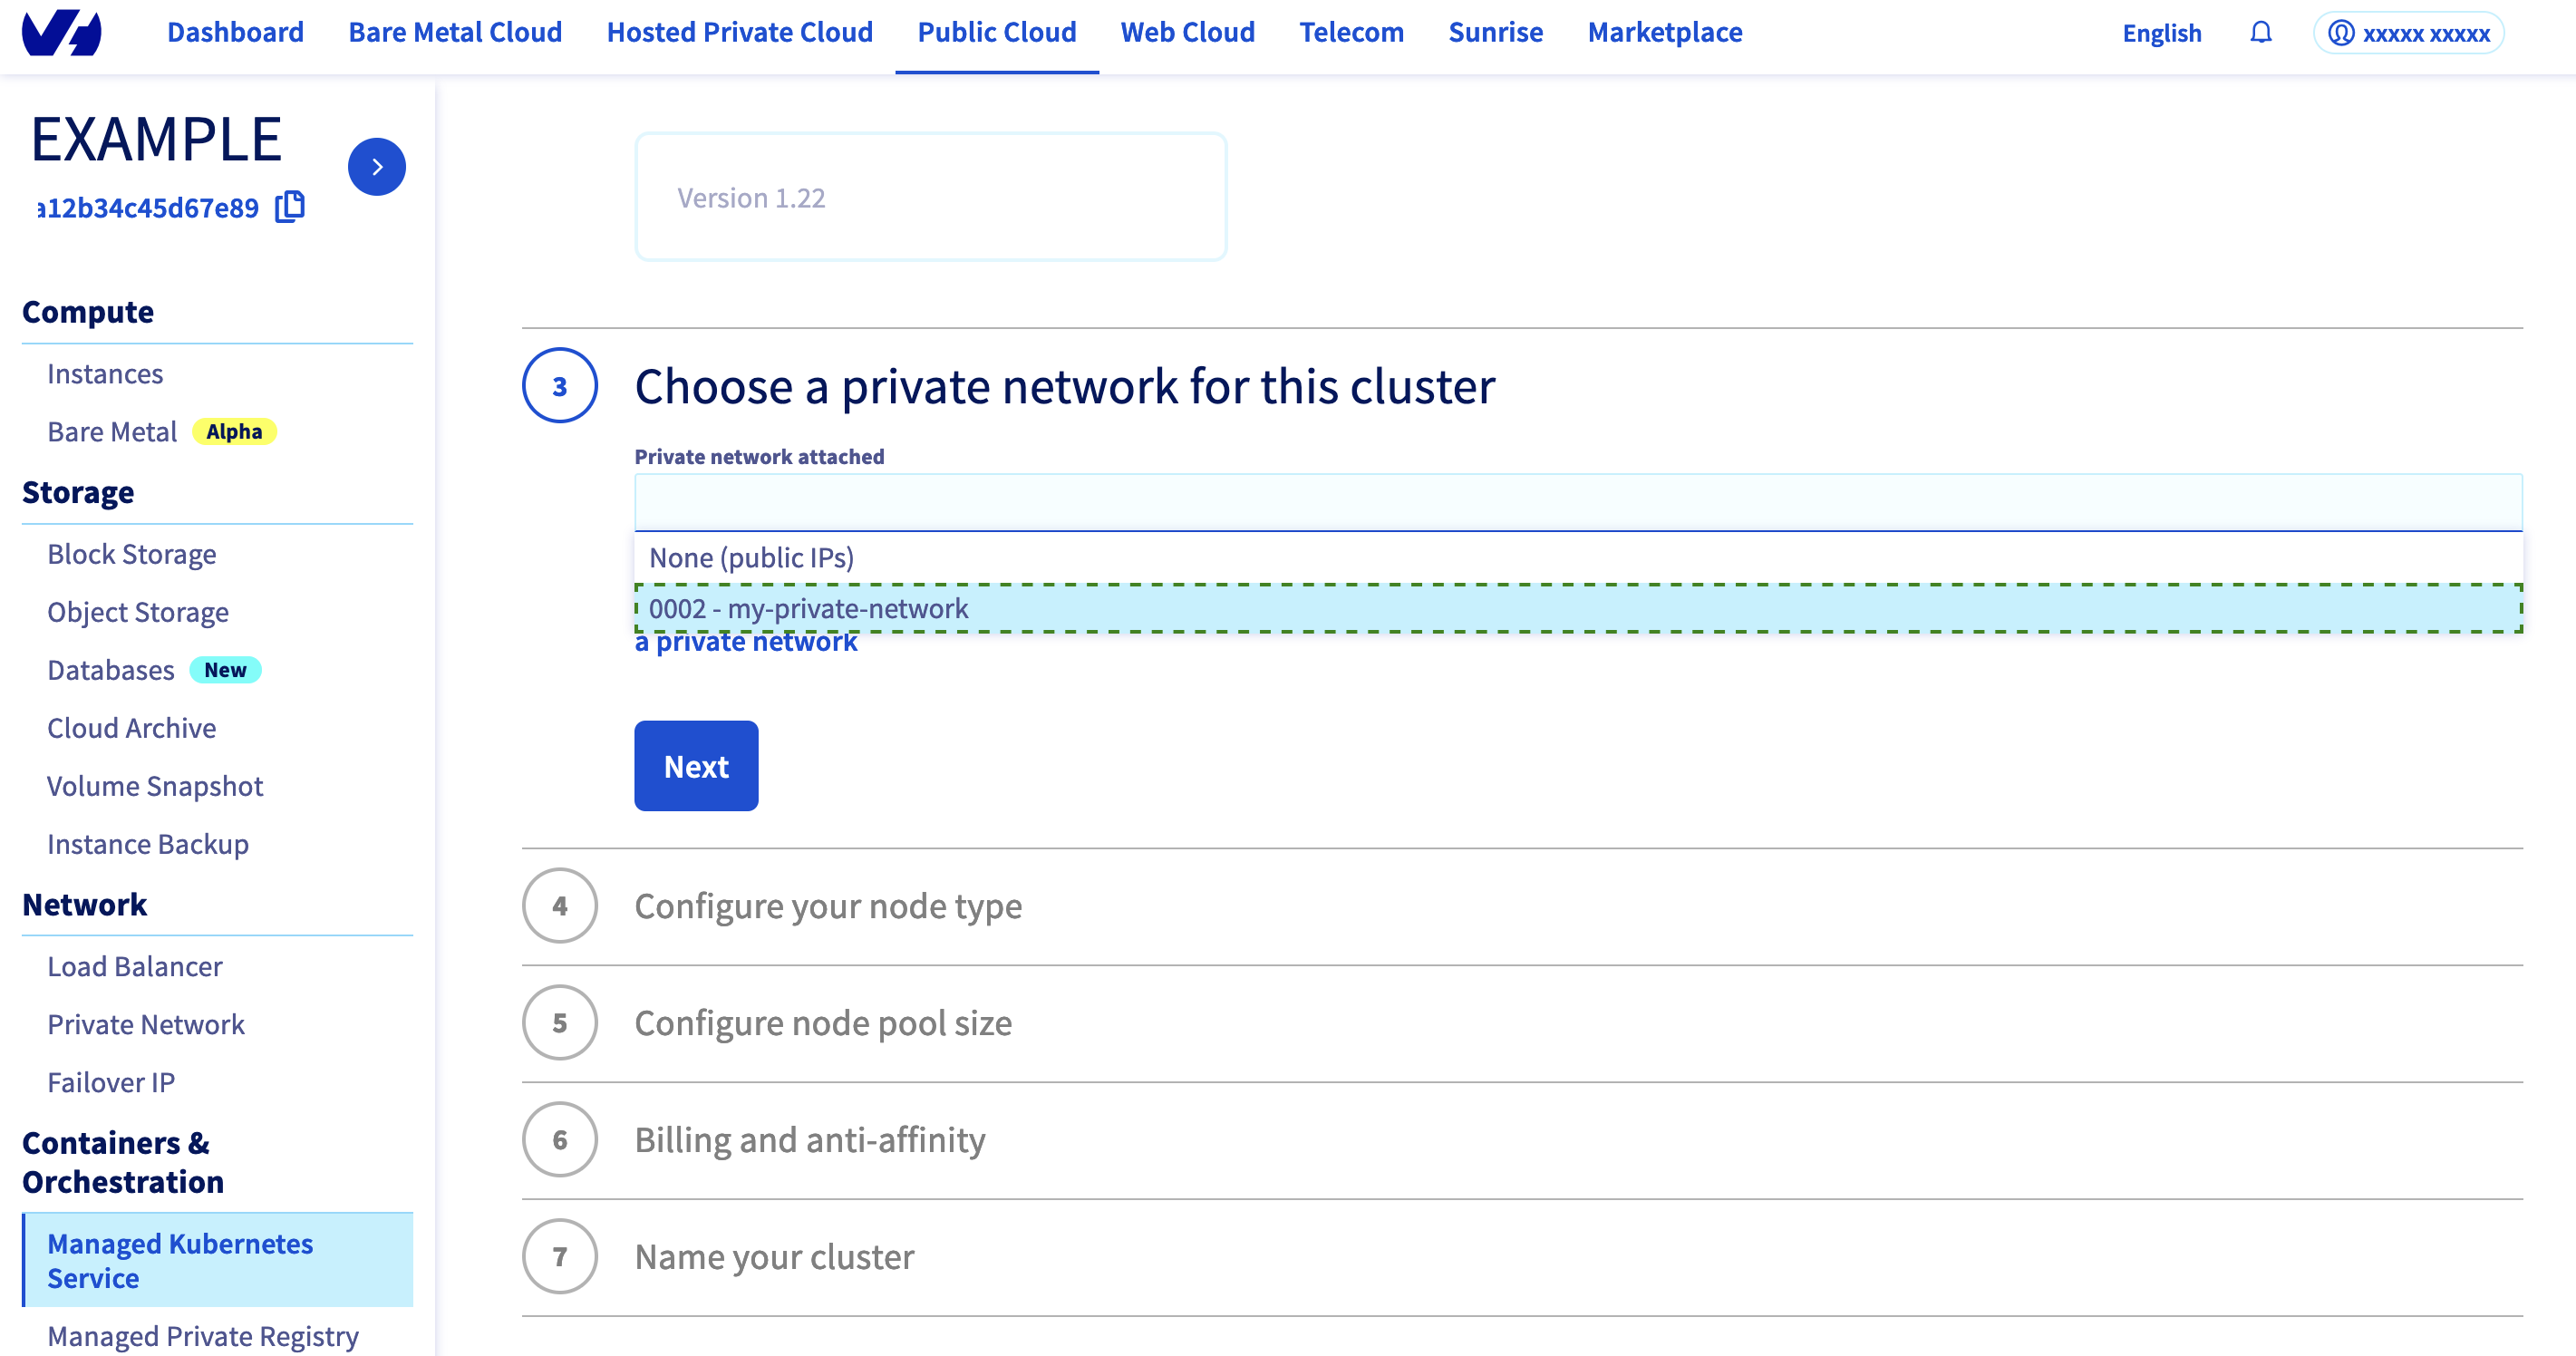 Choose a private network for this cluster